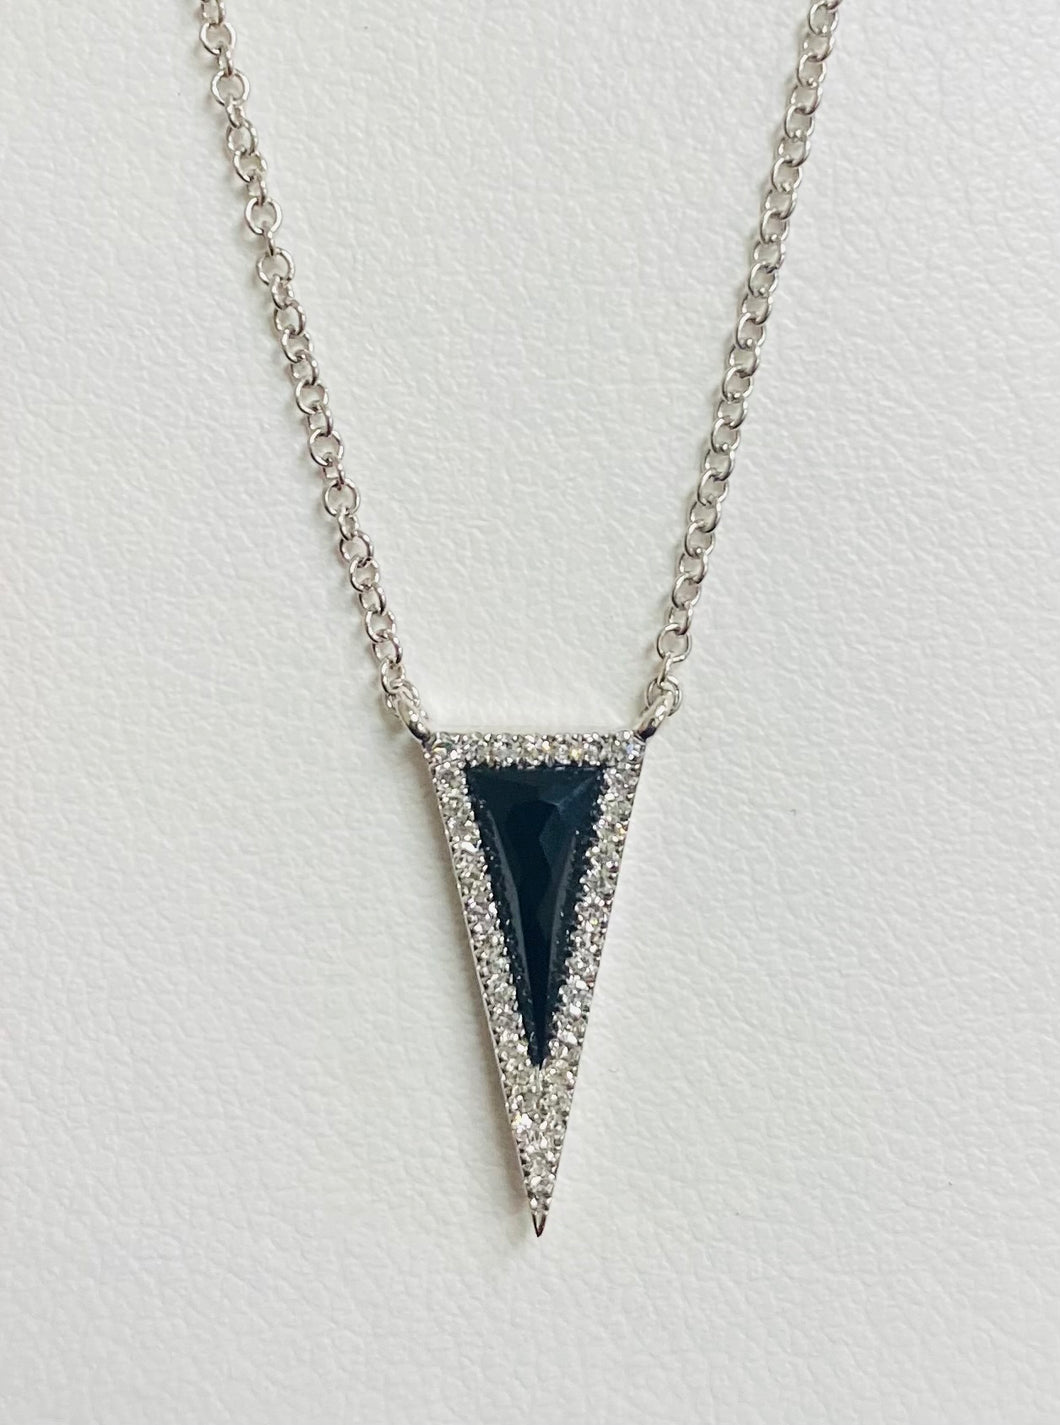 14kt White Gold Onyx and Diamond Necklace